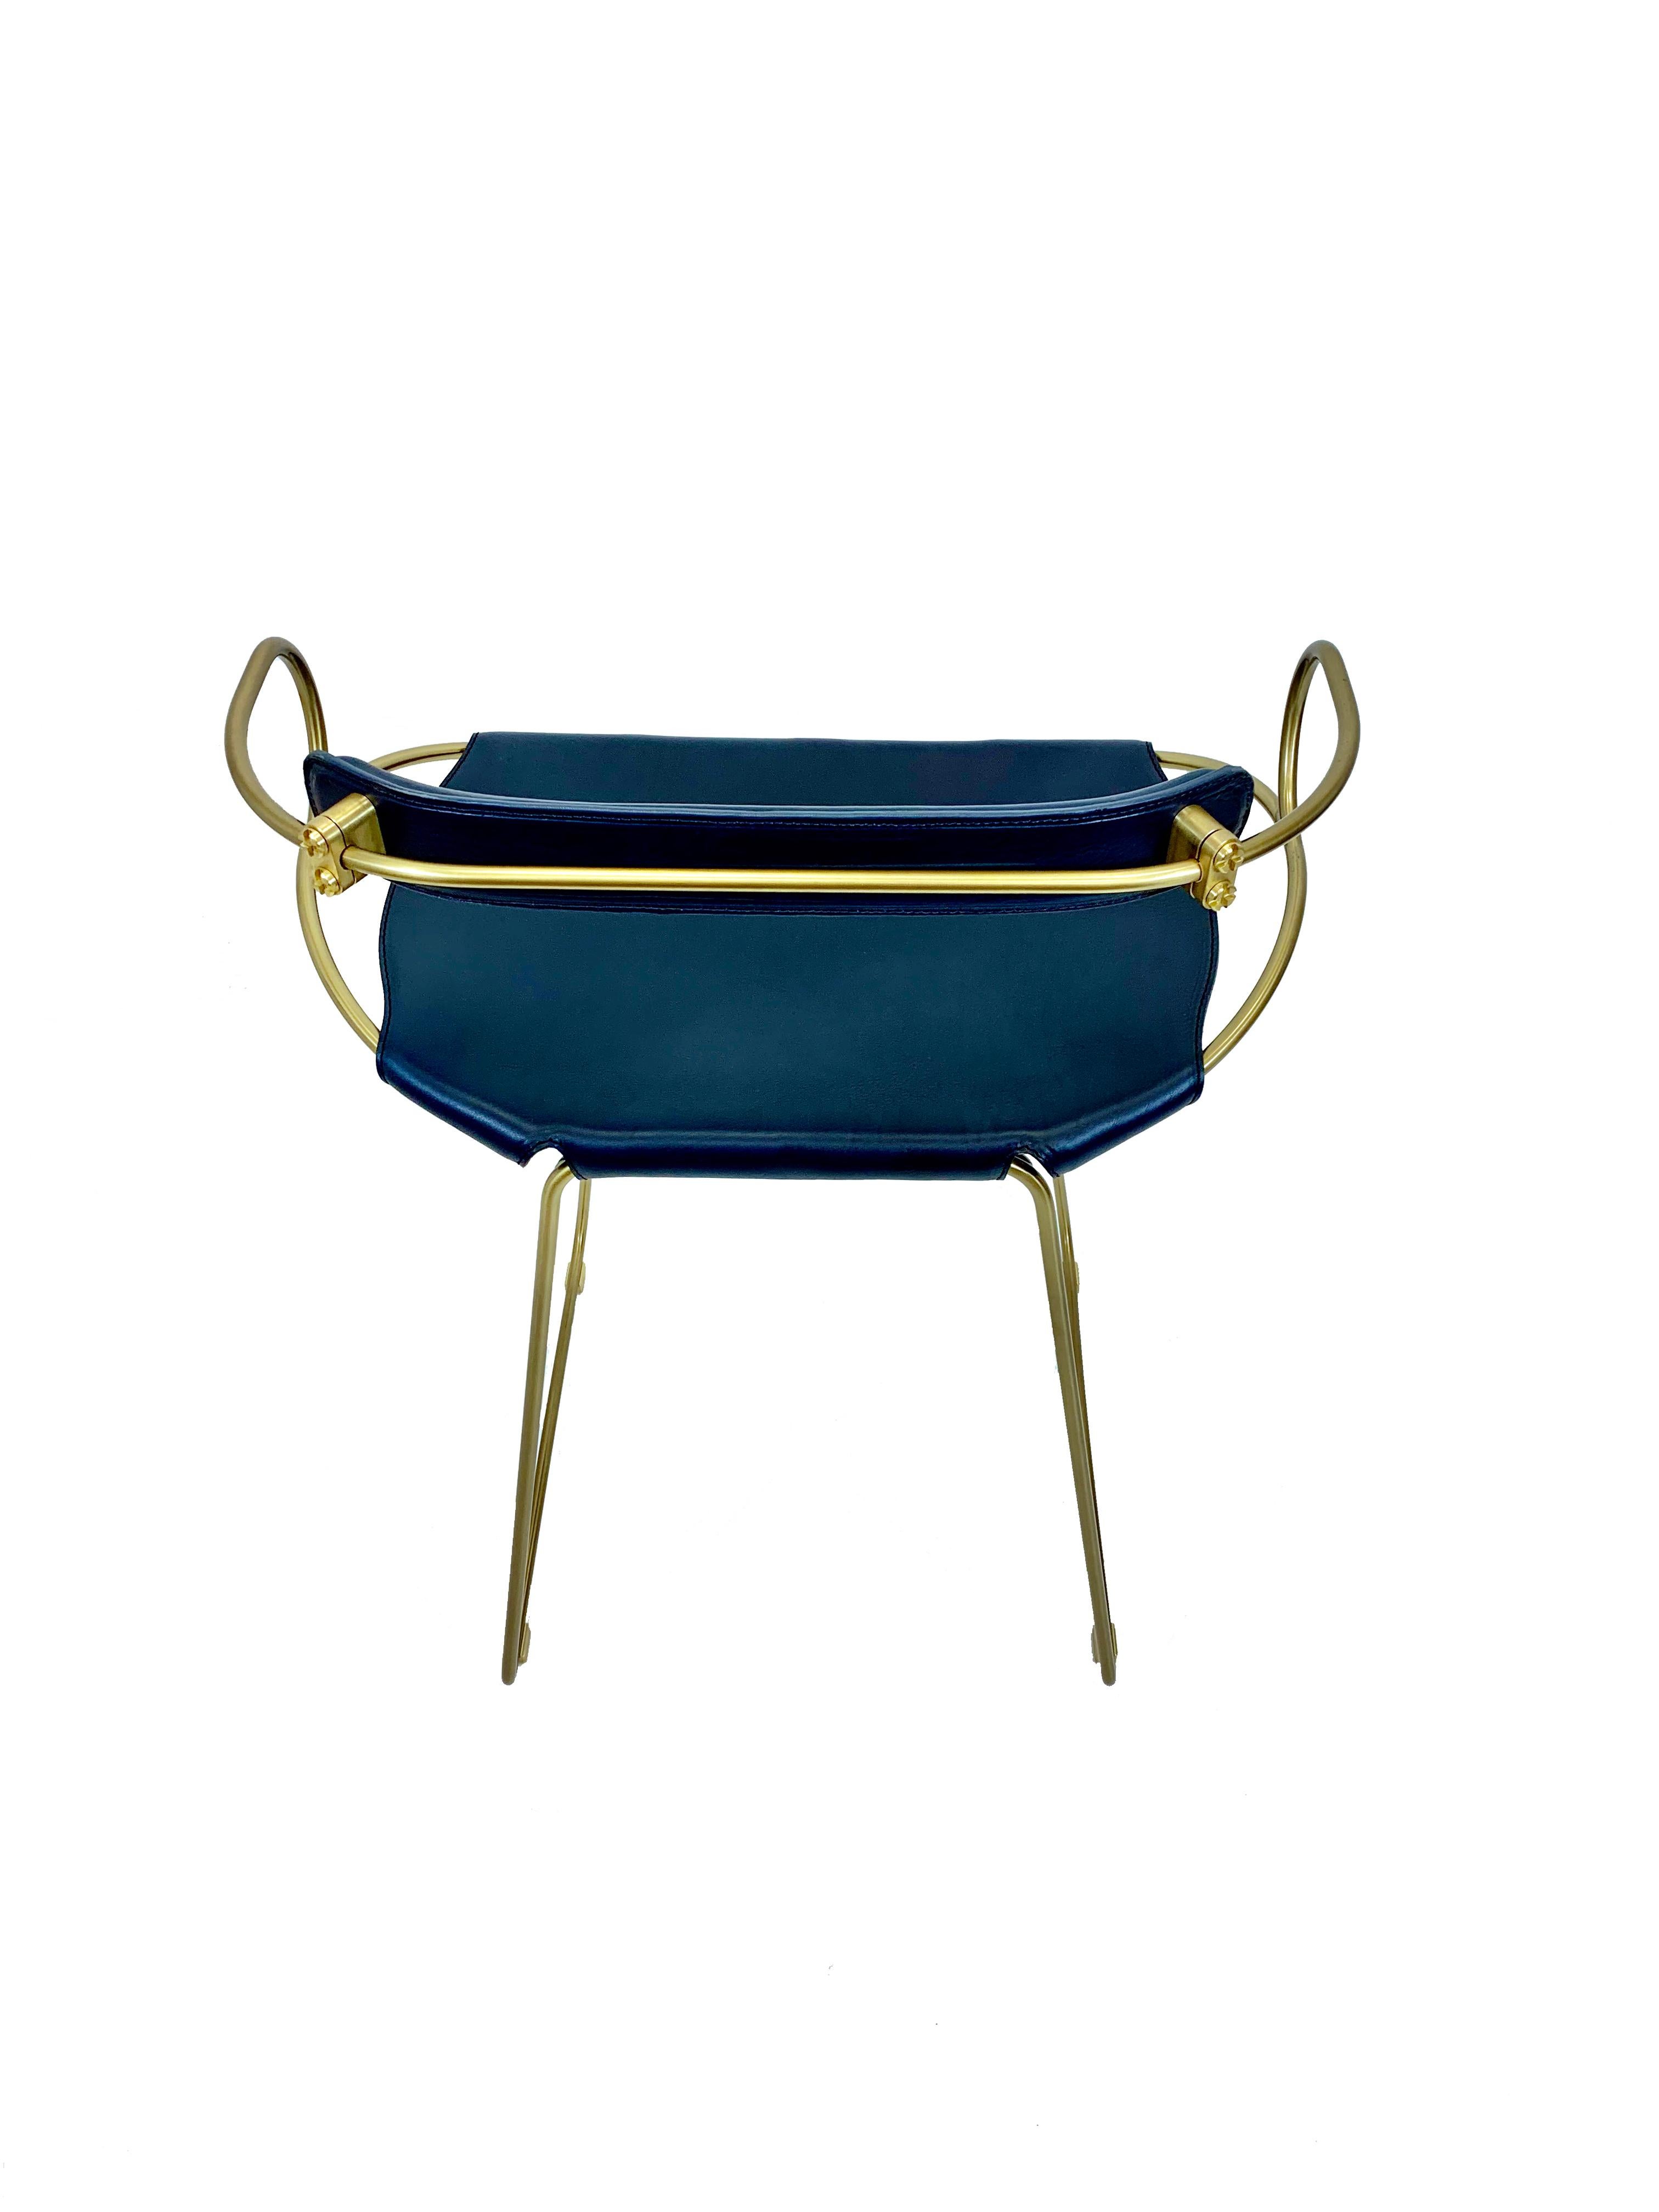 Modern Contemporary Kitchen Counter Bar Stool w. Backrest Brass Metal & Navy Leather For Sale